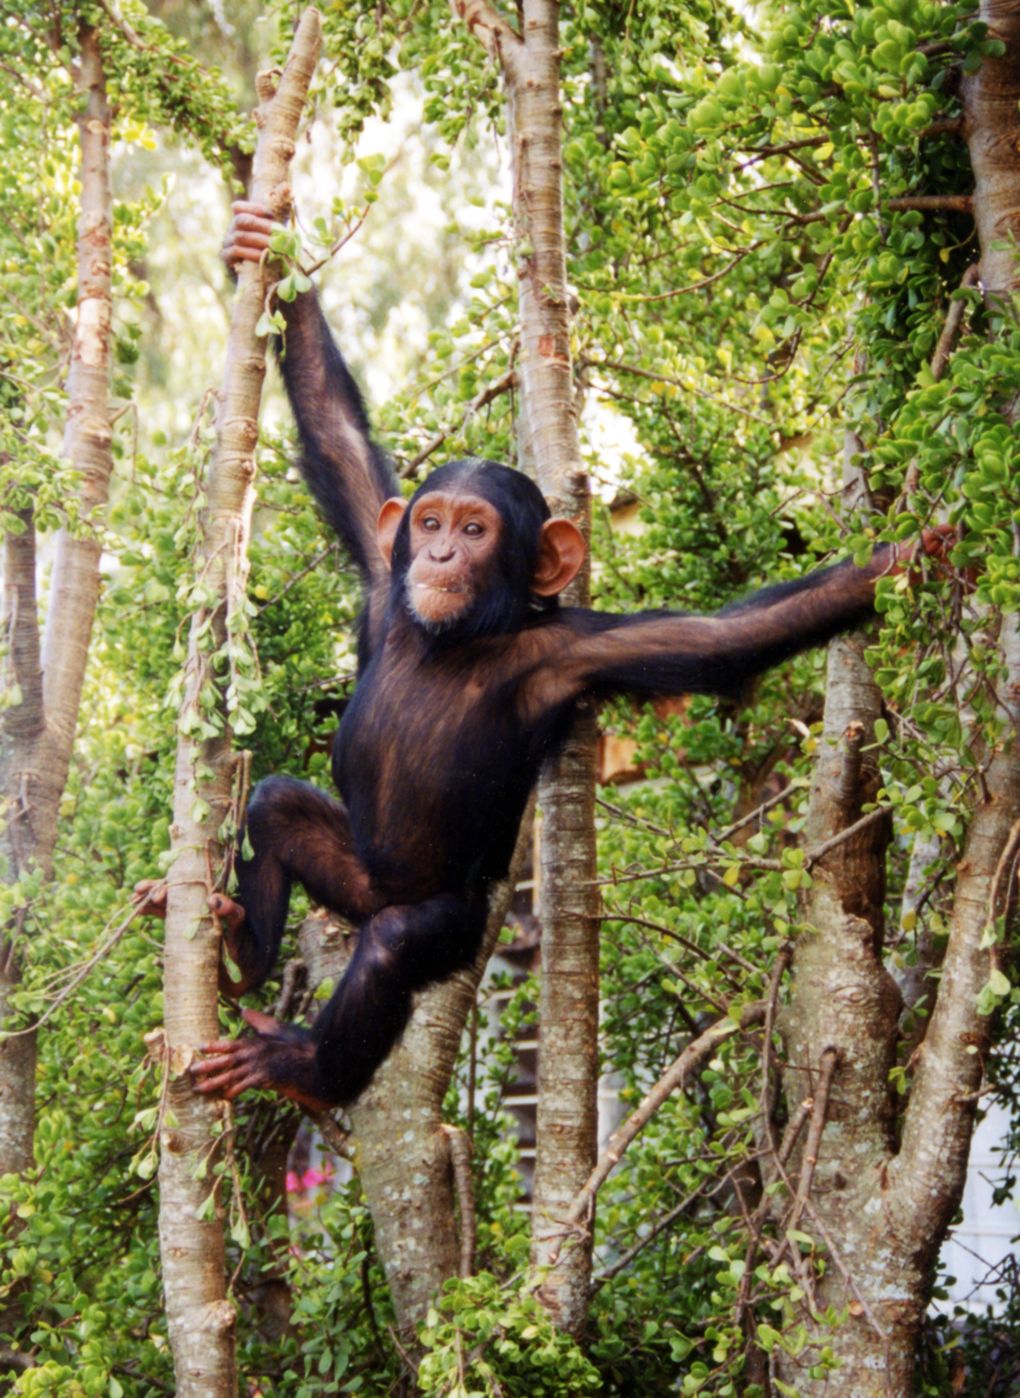 The ‘Whos’ and ‘Whichs’ of Chimpanzees